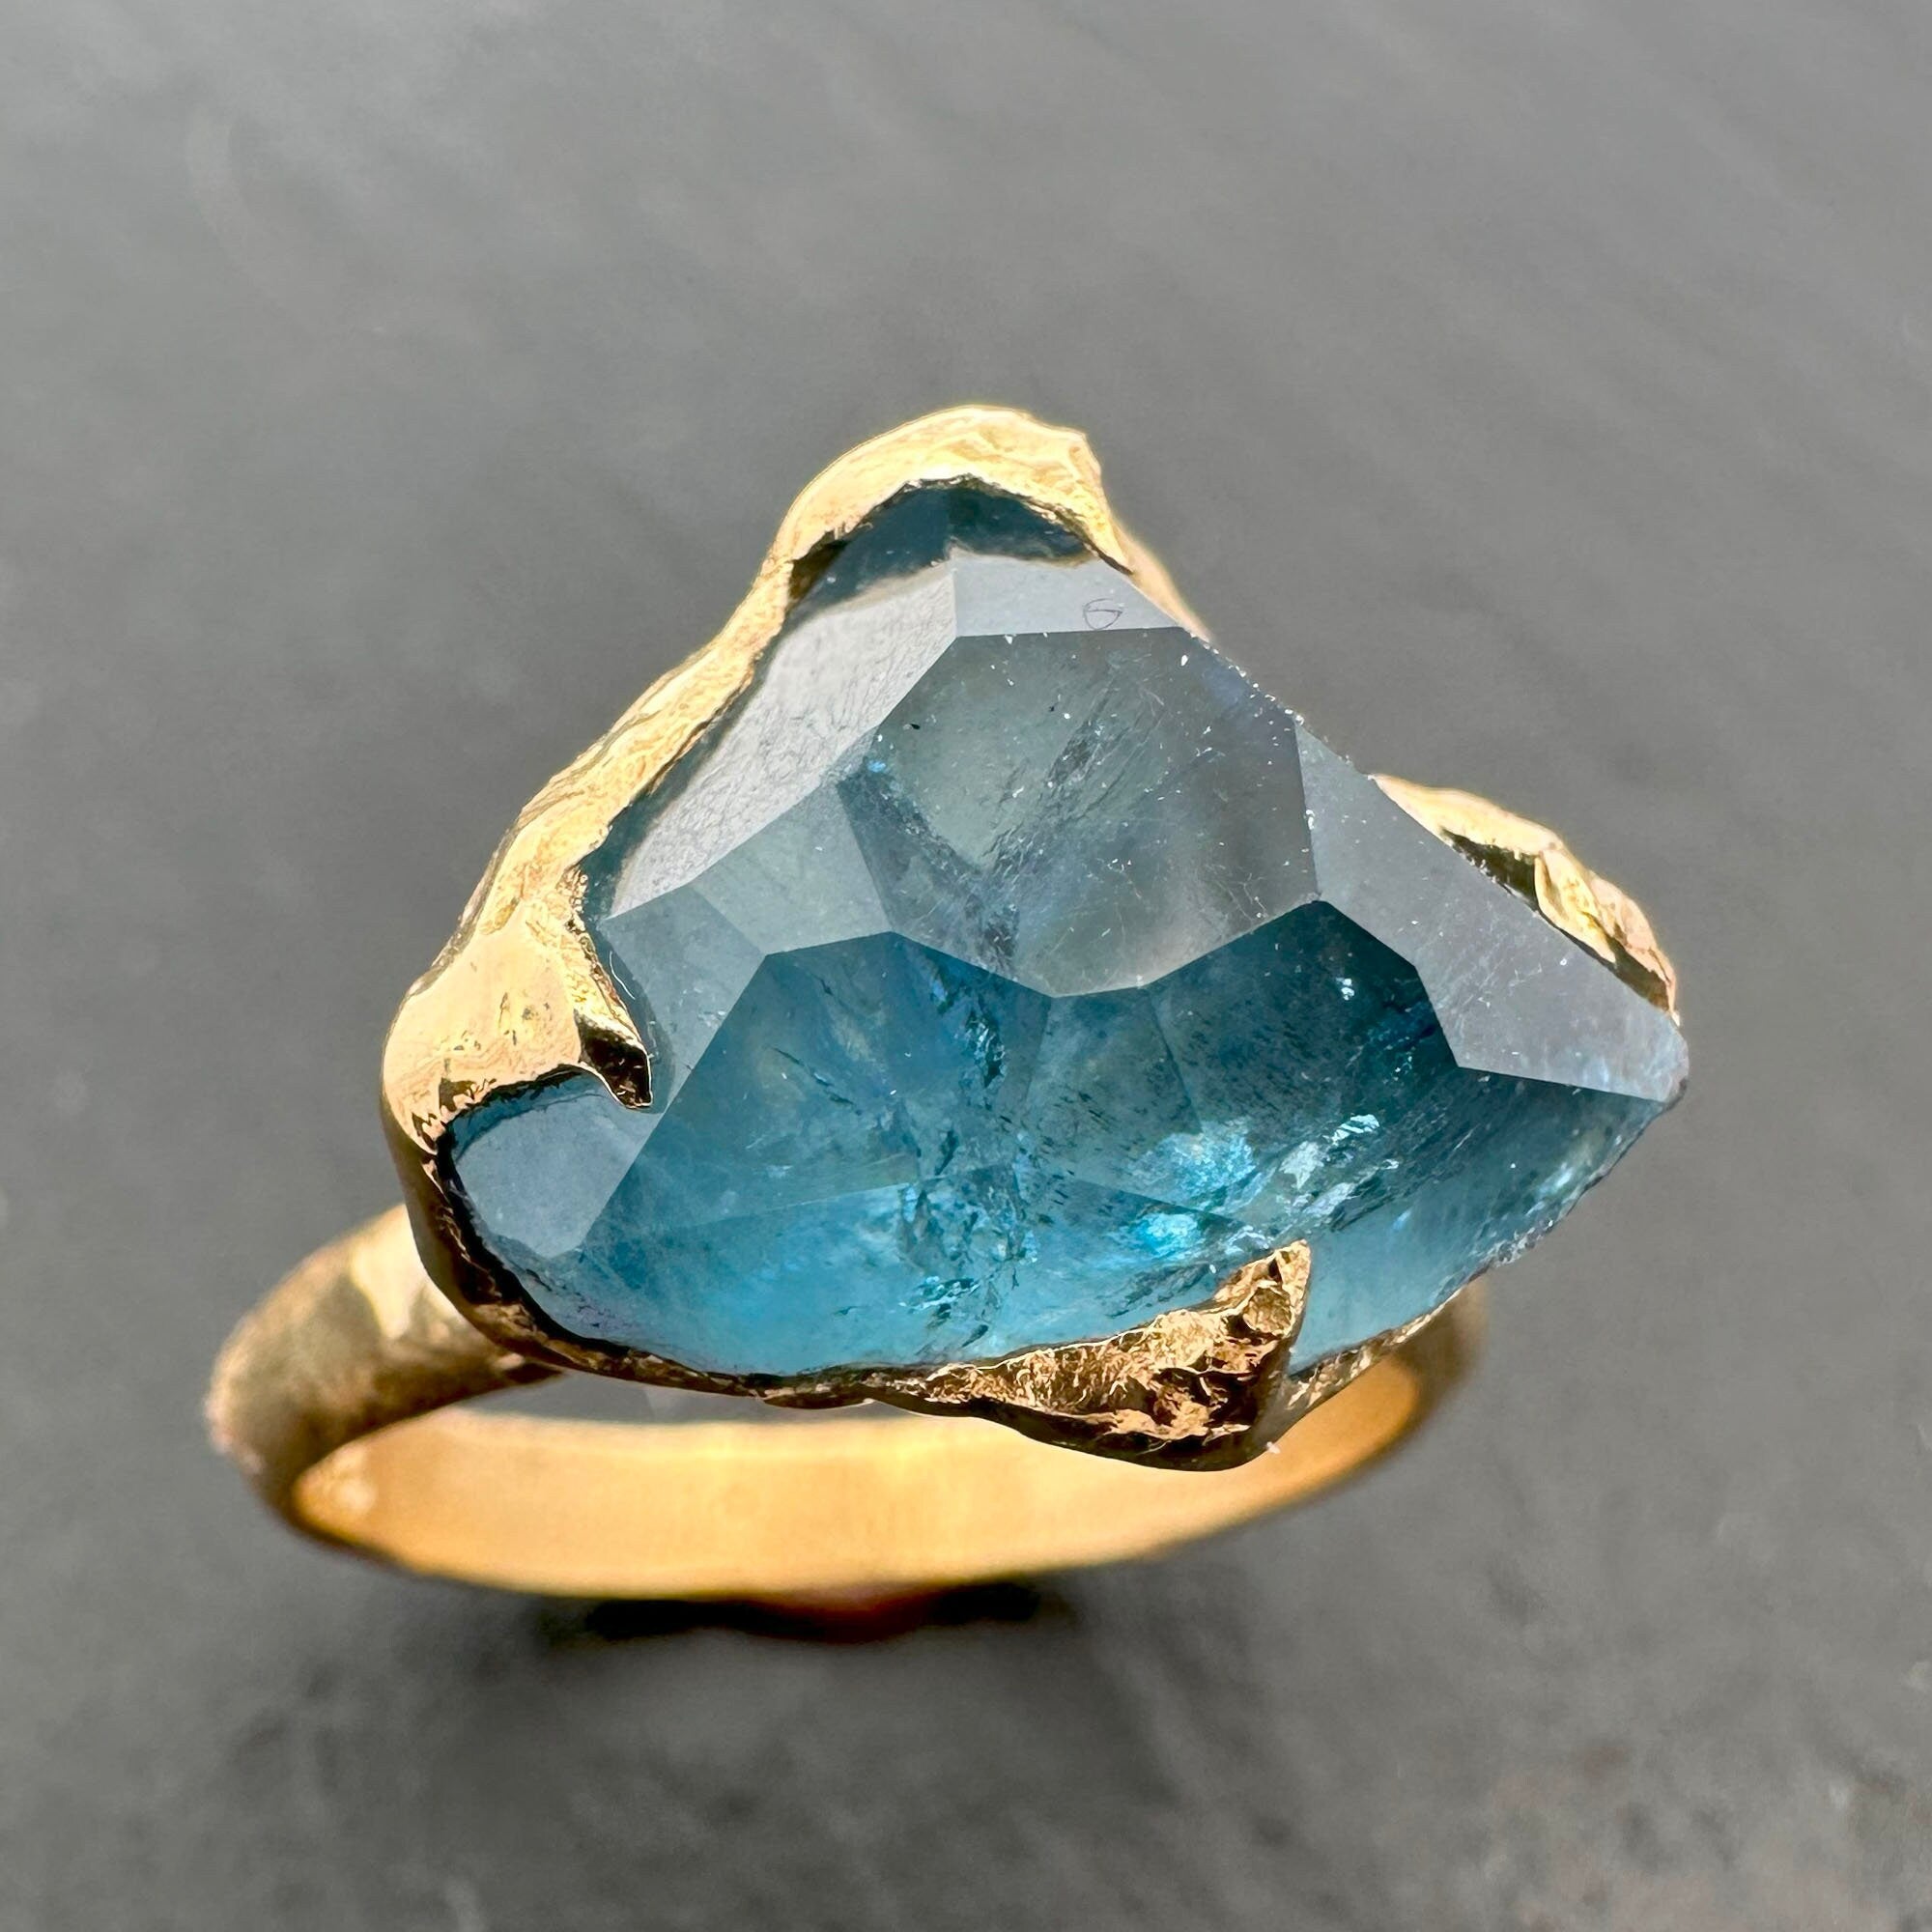 Partially faceted Aquamarine Solitaire Ring 18k gold Custom One Of a Kind Gemstone Ring Bespoke byAngeline 3481